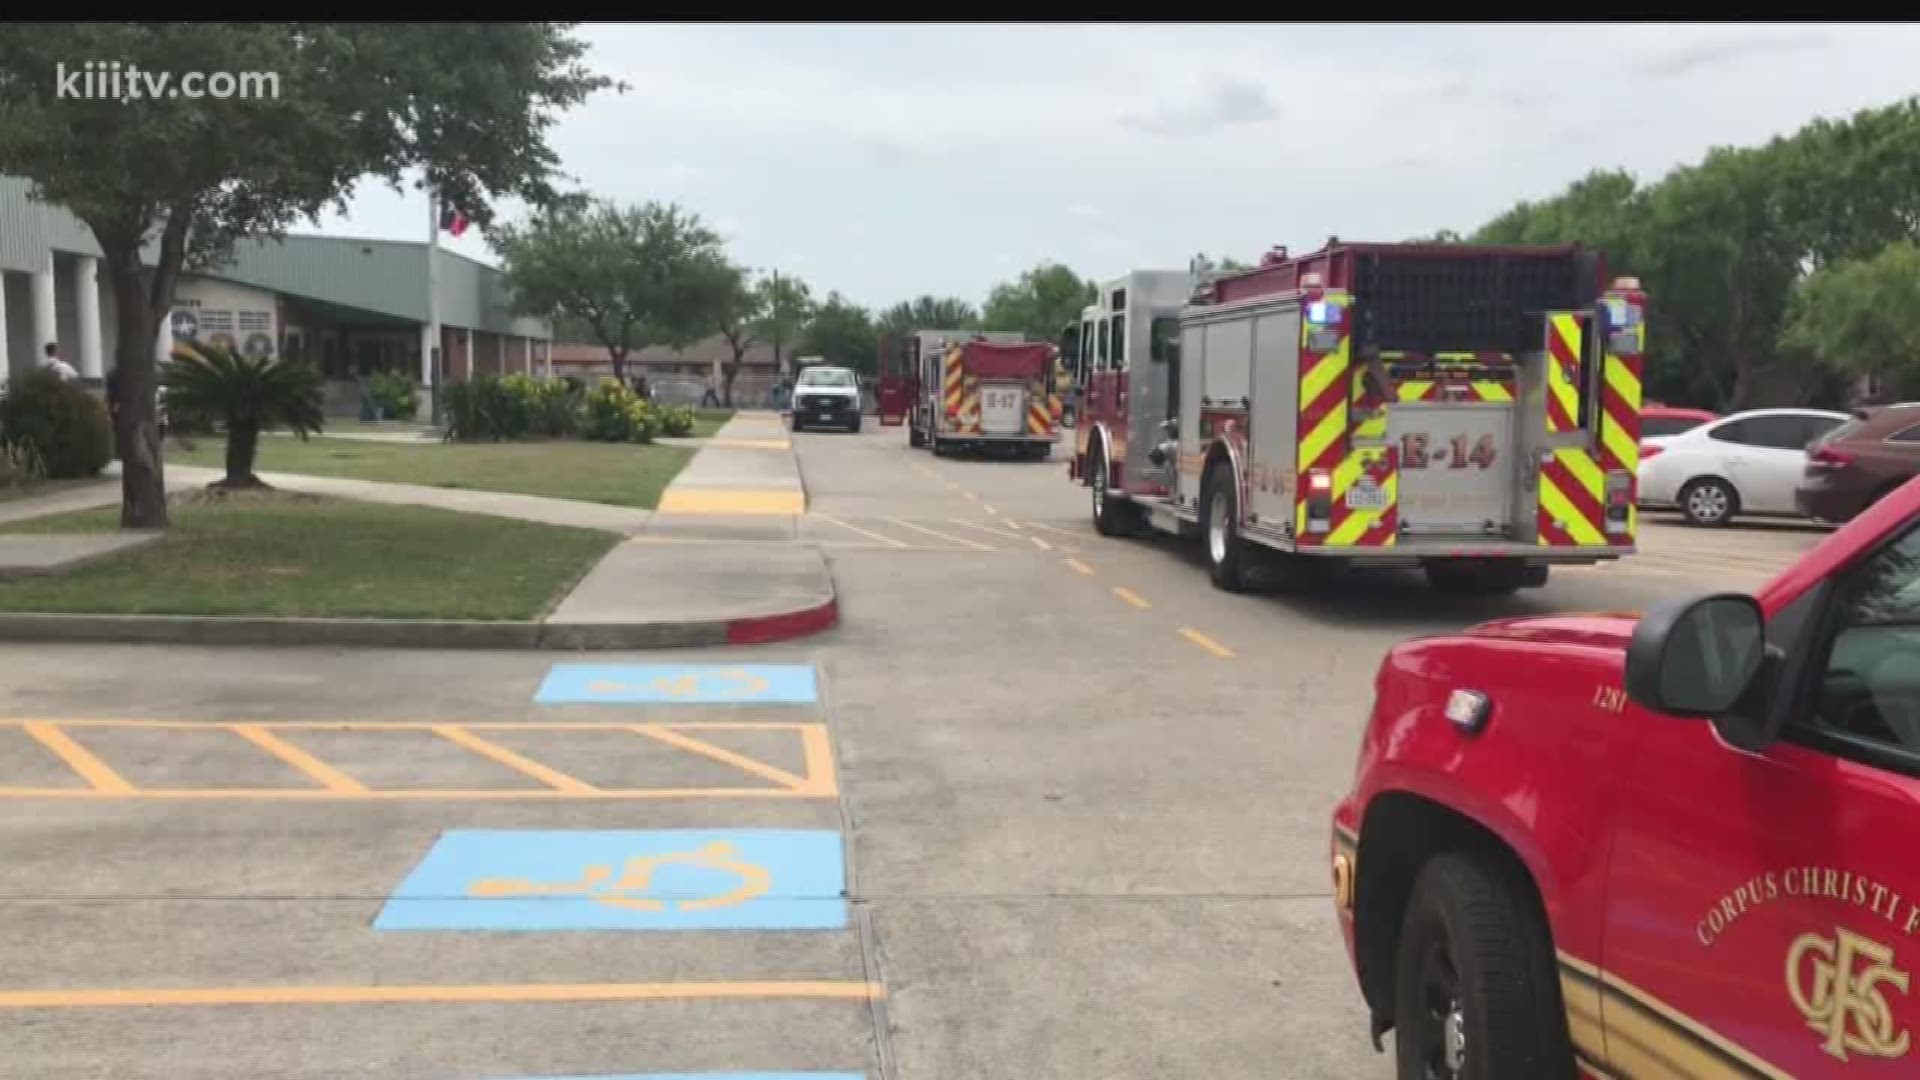 For the second time in two days, students at a Corpus Christi school had to evacuate their campus Friday due to smoke in their school.